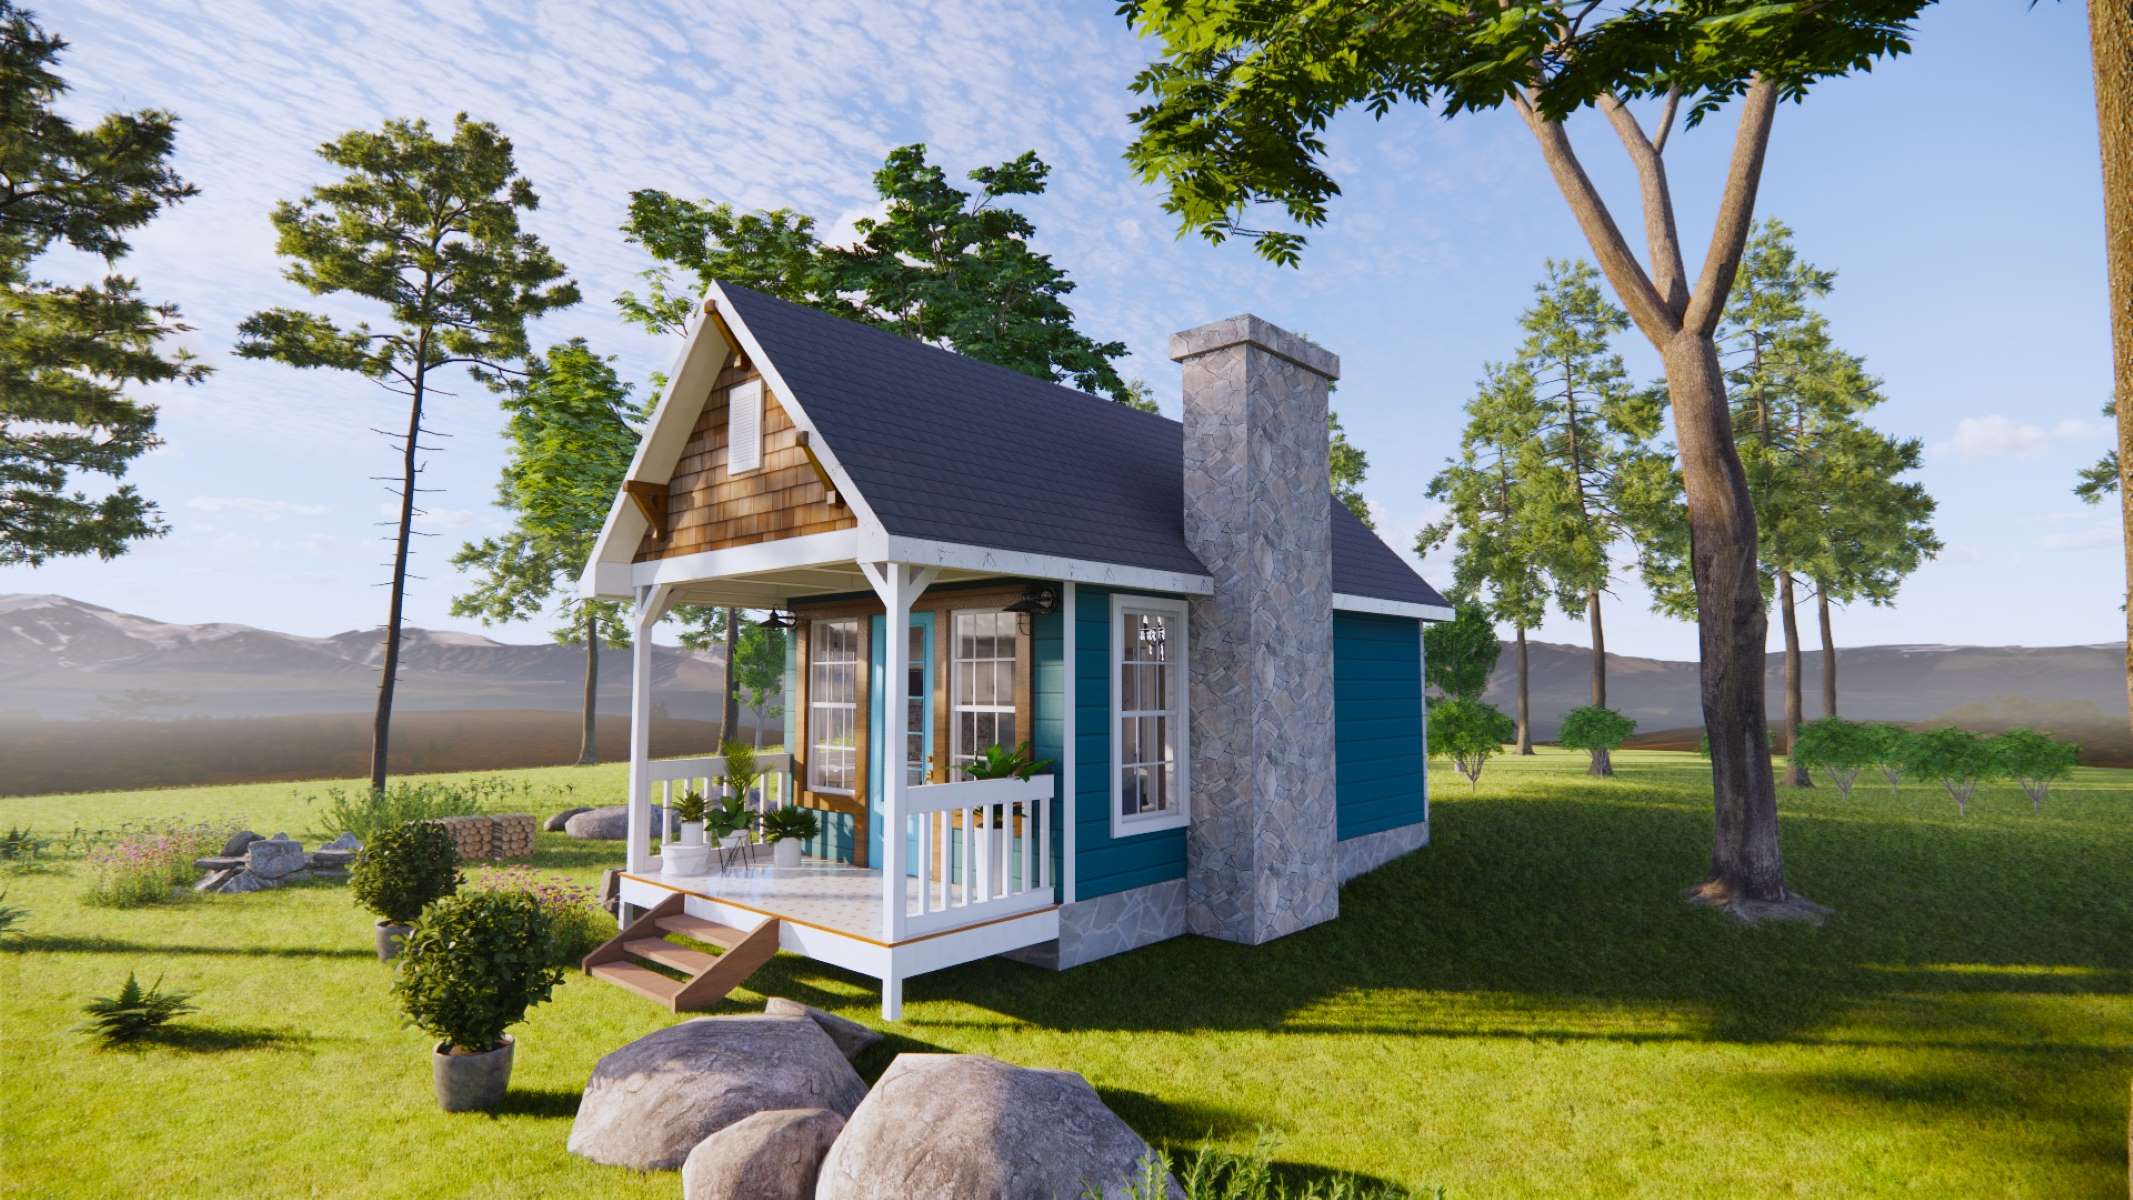 How To Design And Build Plans For A Tiny House